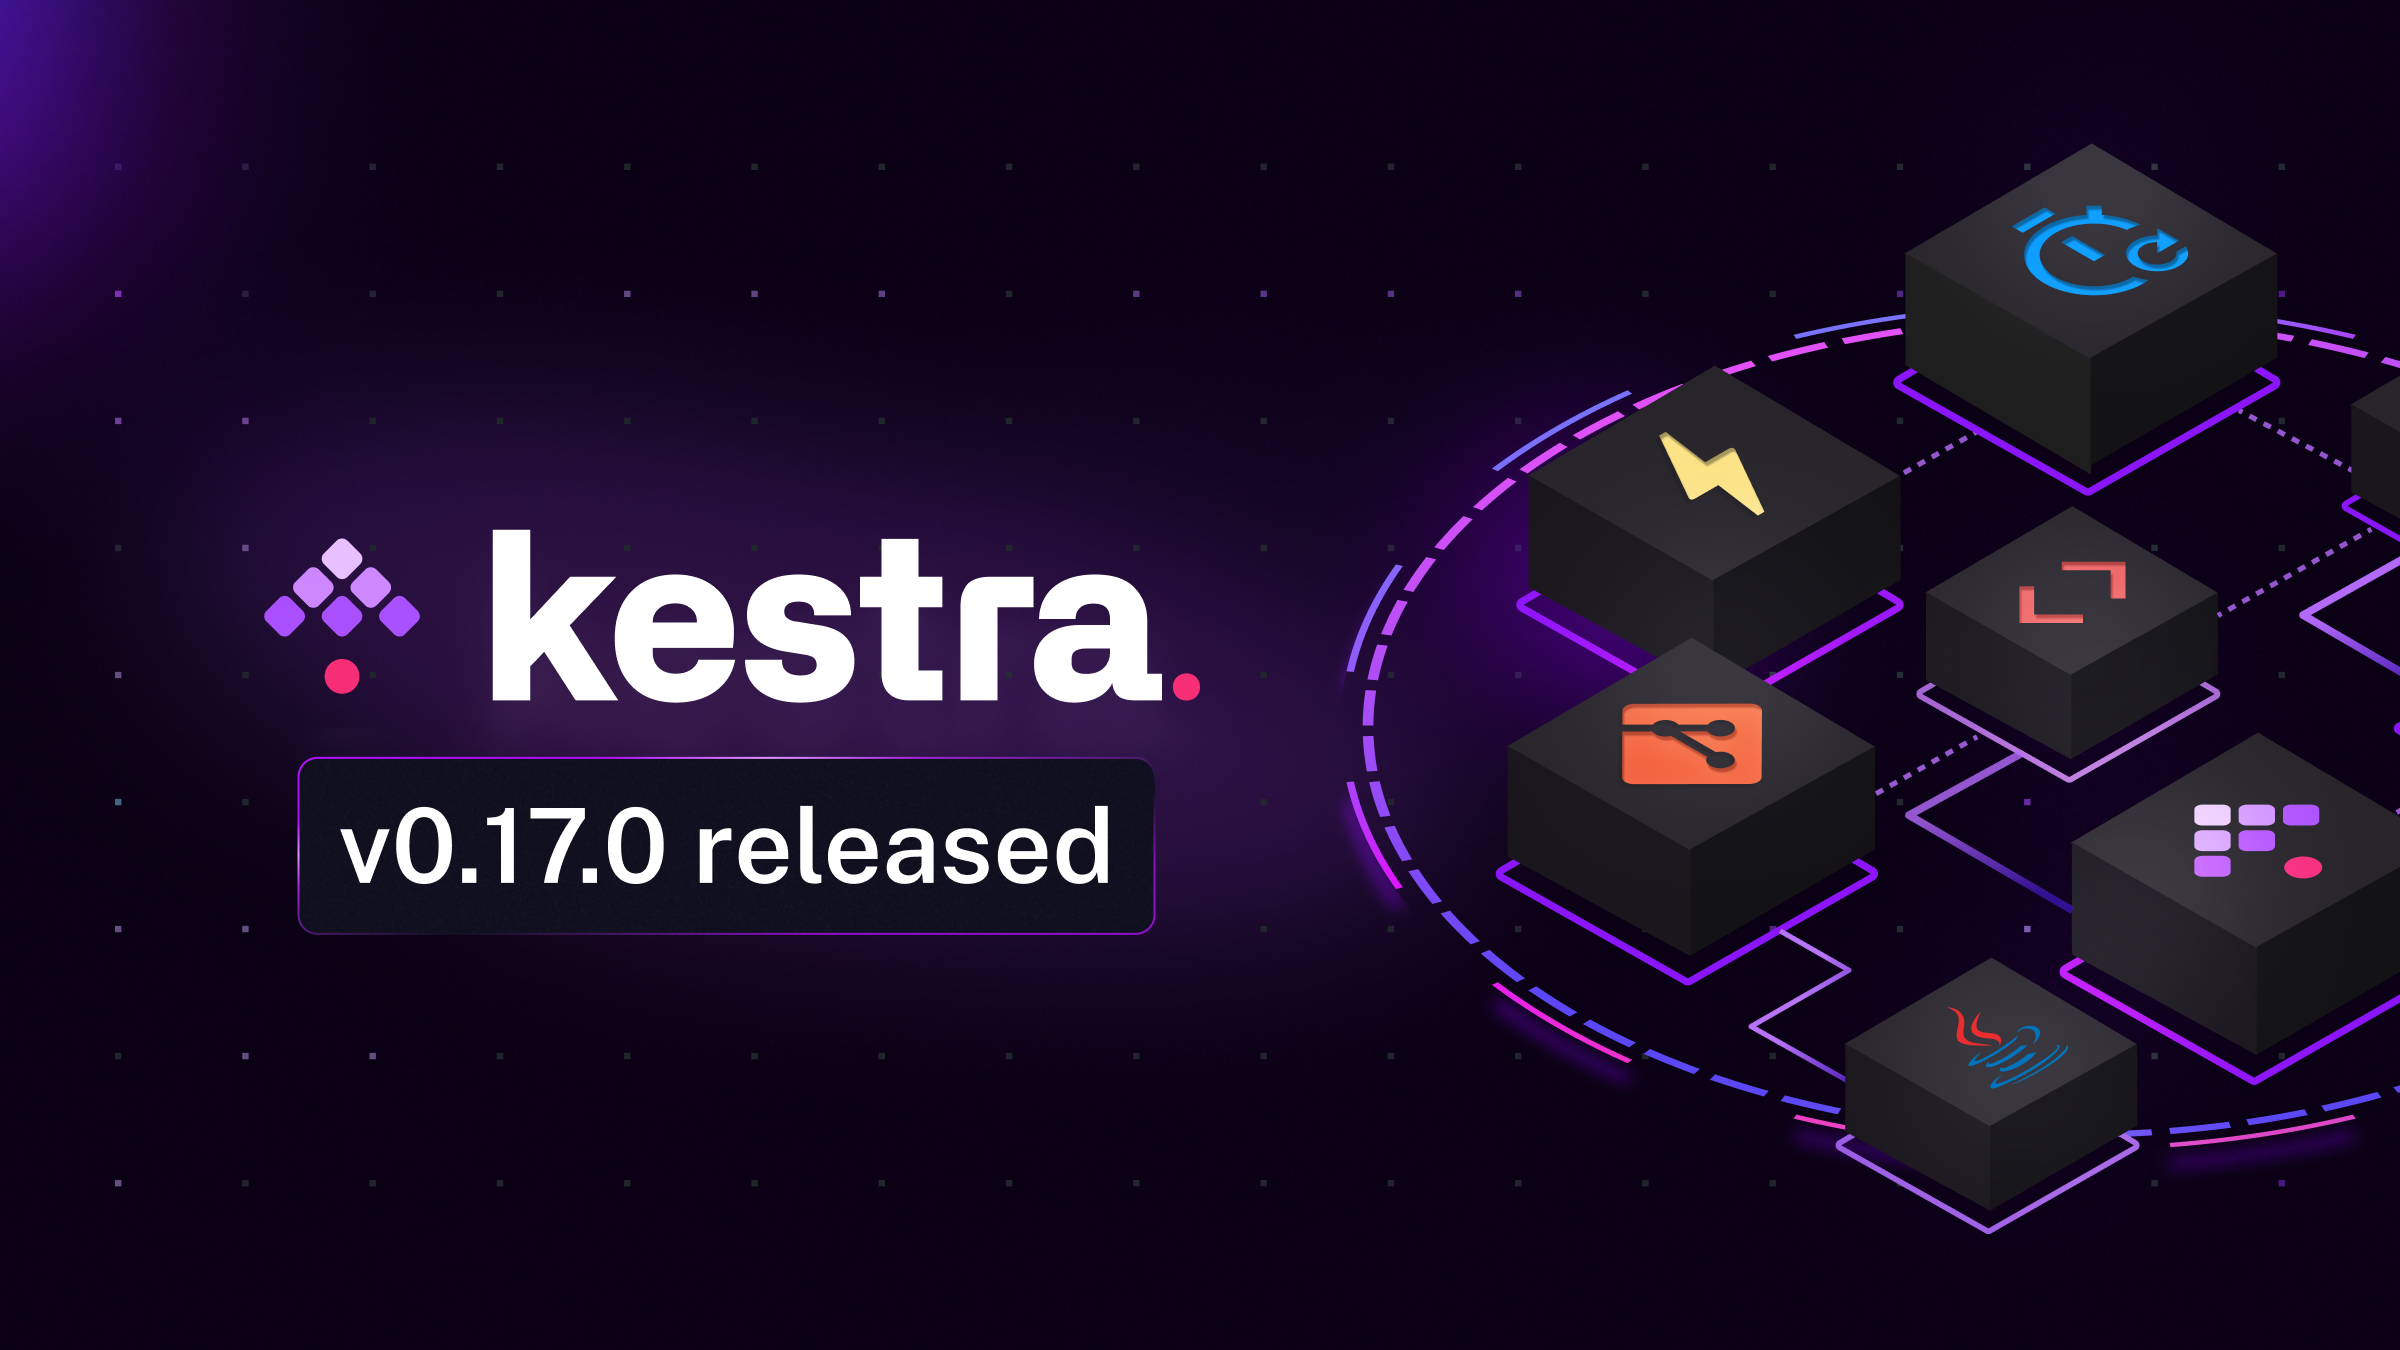 Kestra 0.17.0 brings a lightning-fast Code Editor, Autocompletion, improved Git sync, and Realtime Event Triggers ⚡️